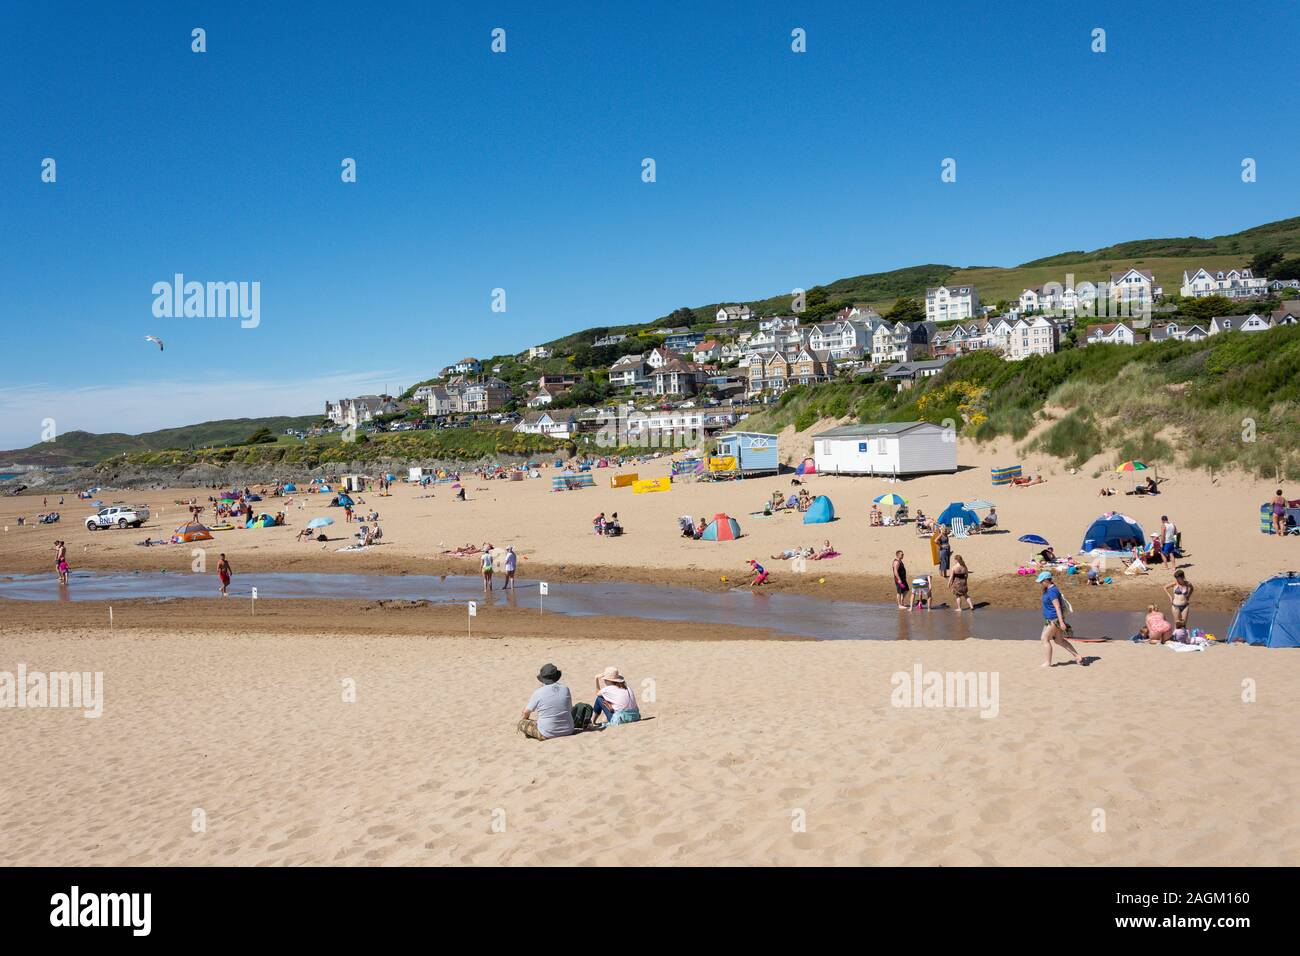 Woolacombe Sands Beach, Woolacombe, Devon, Angleterre, Royaume-Uni Banque D'Images